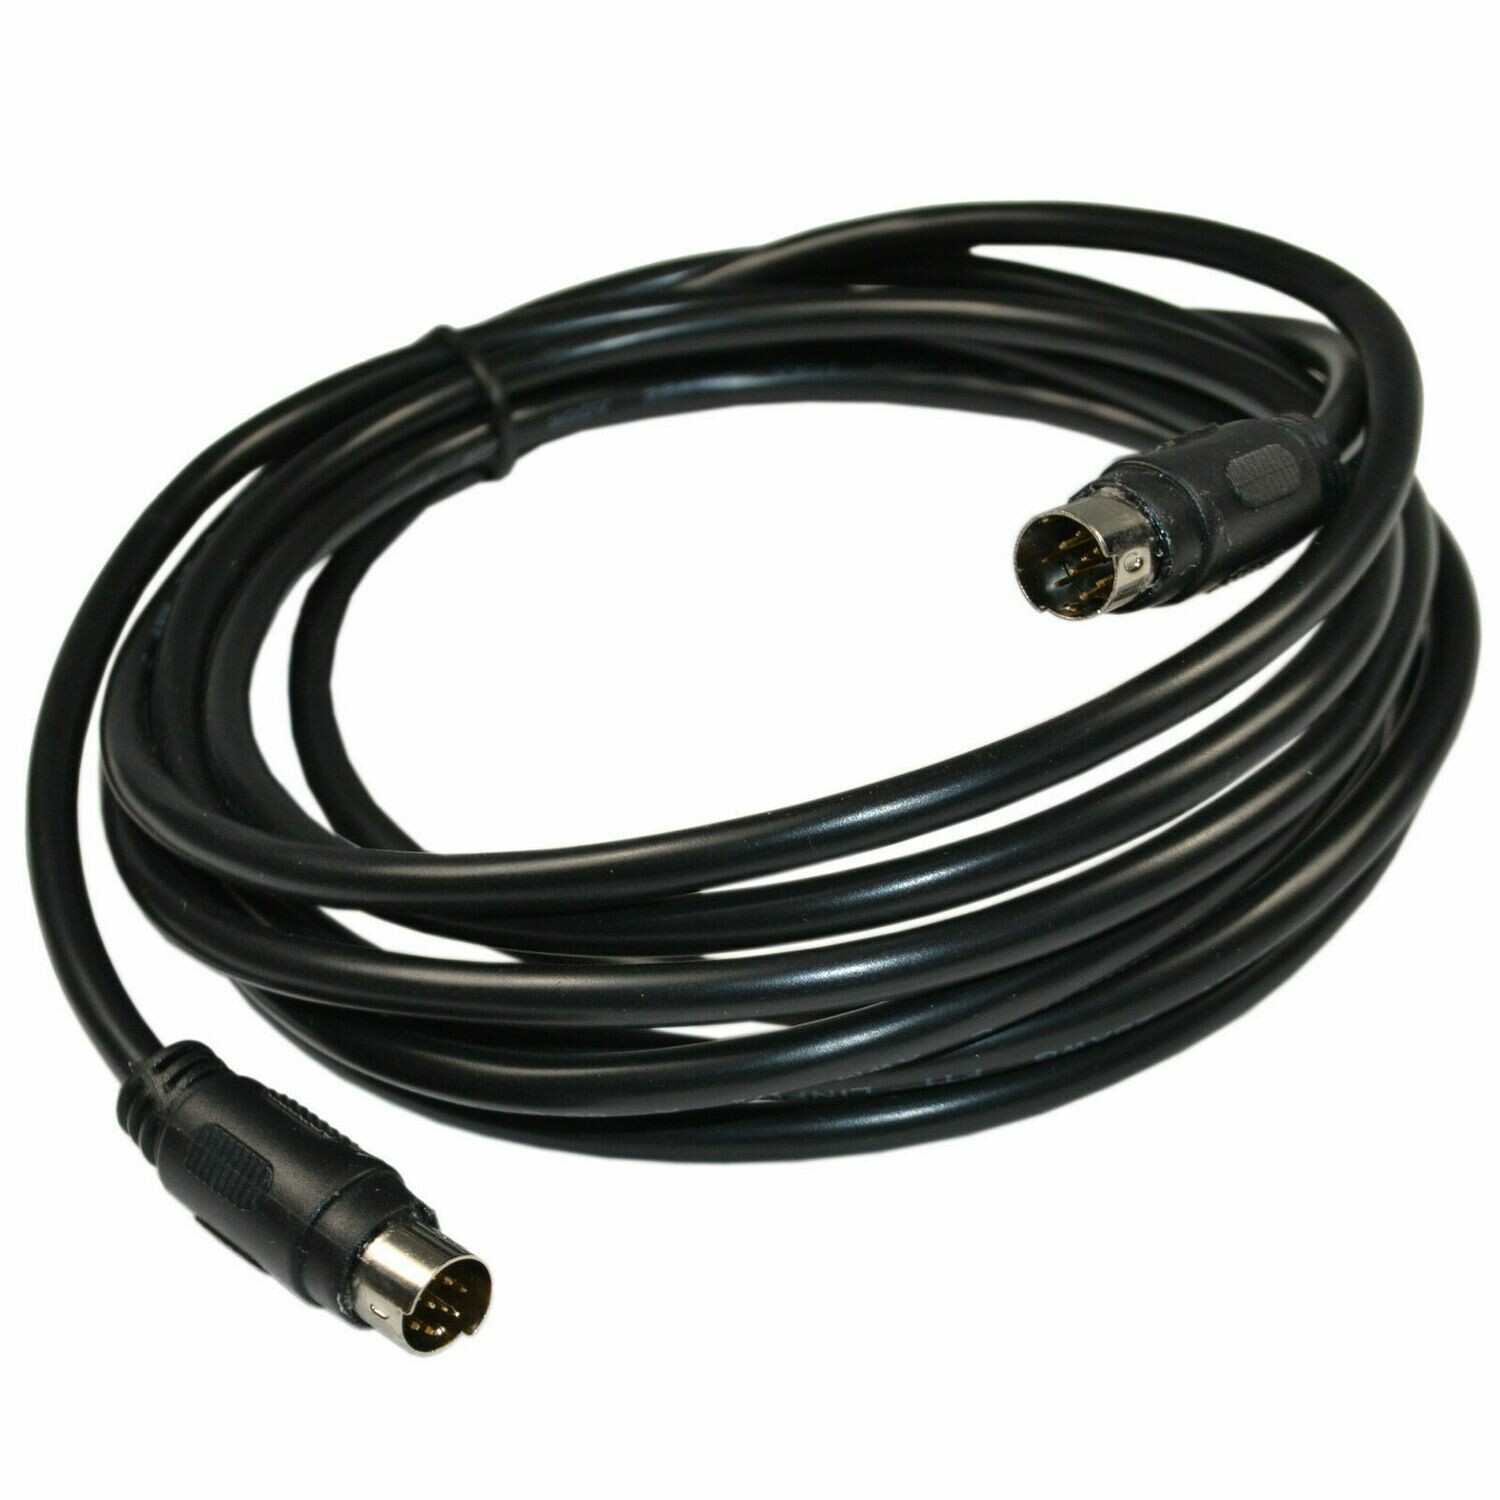 Bose speaker replacement wire black 18'+ RCA to b/w